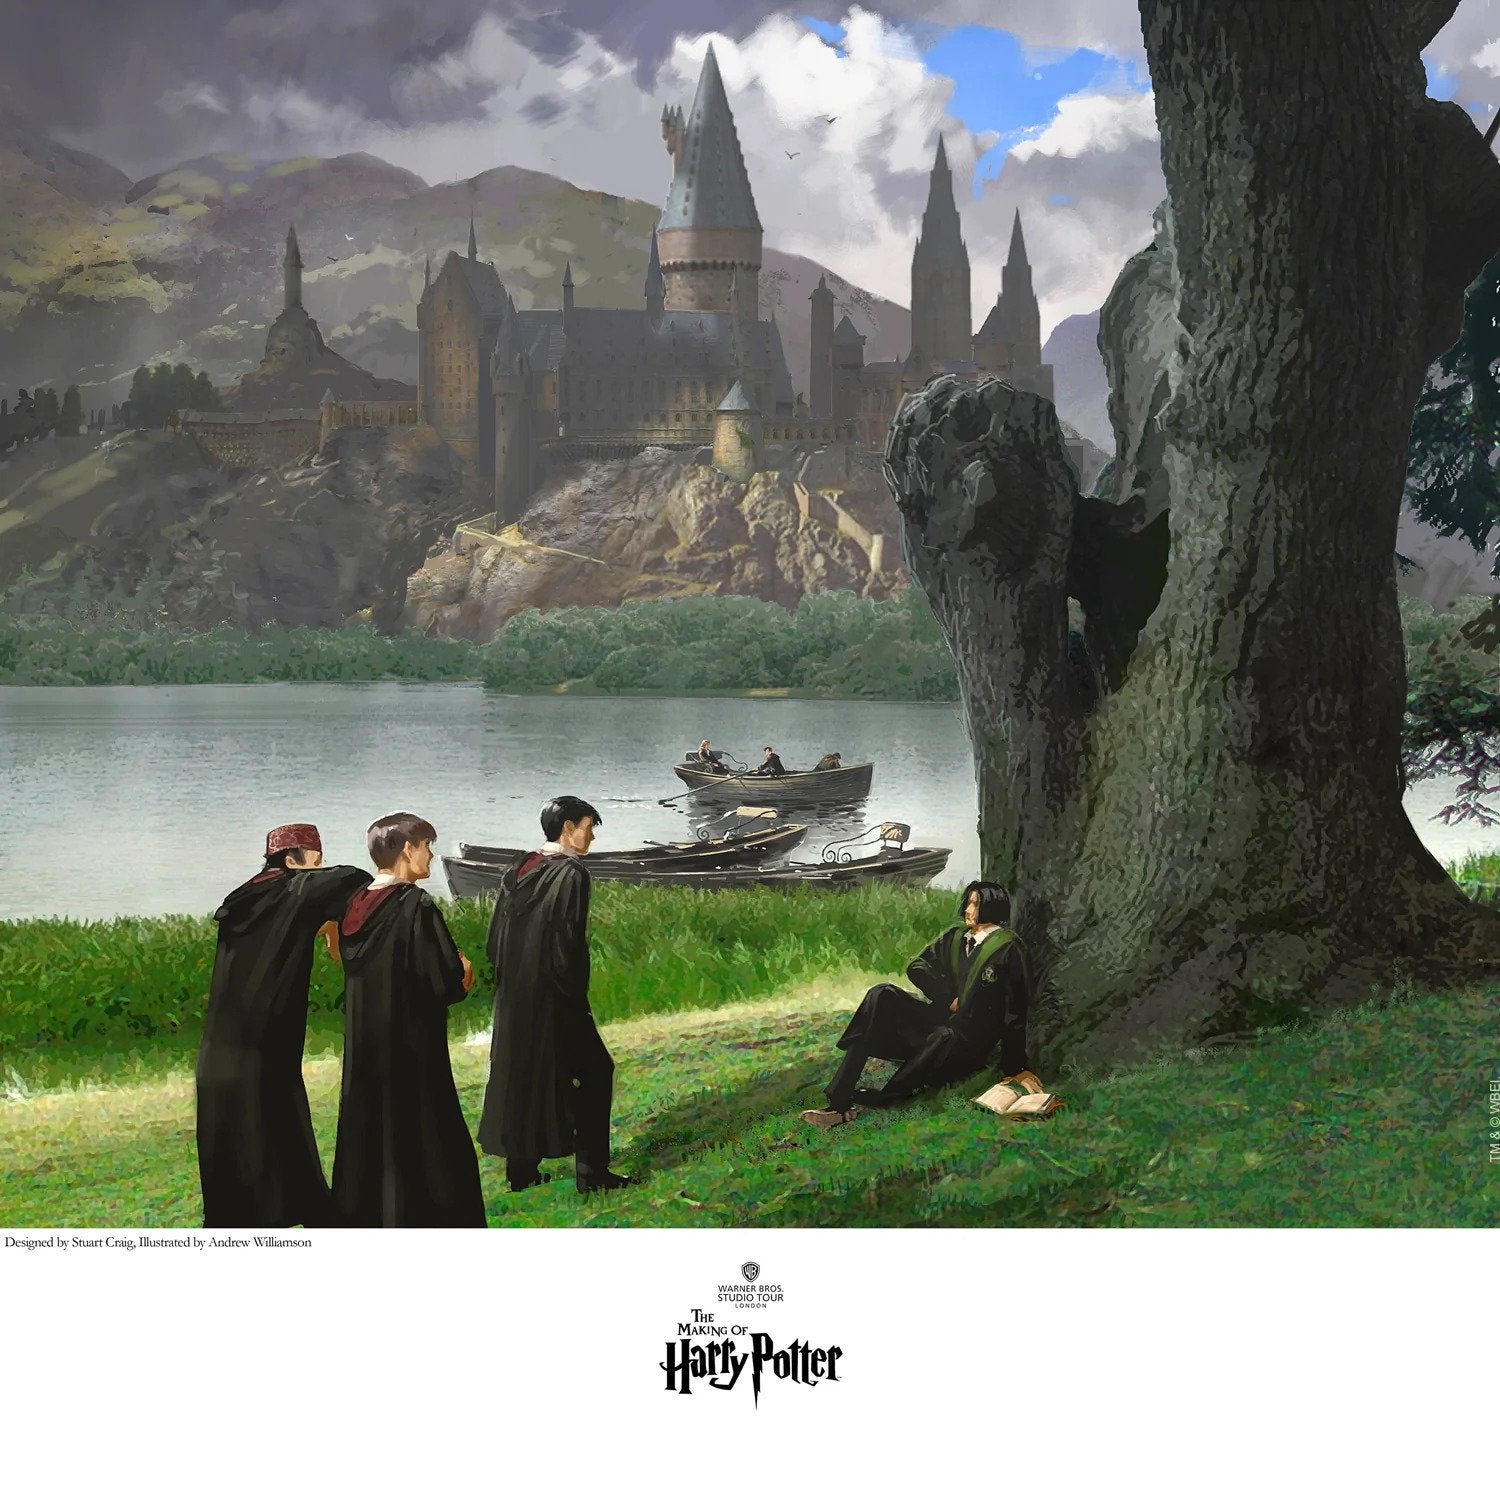 This piece features young Professor Snape being taunted by his classmates, while he sits under a tree. 